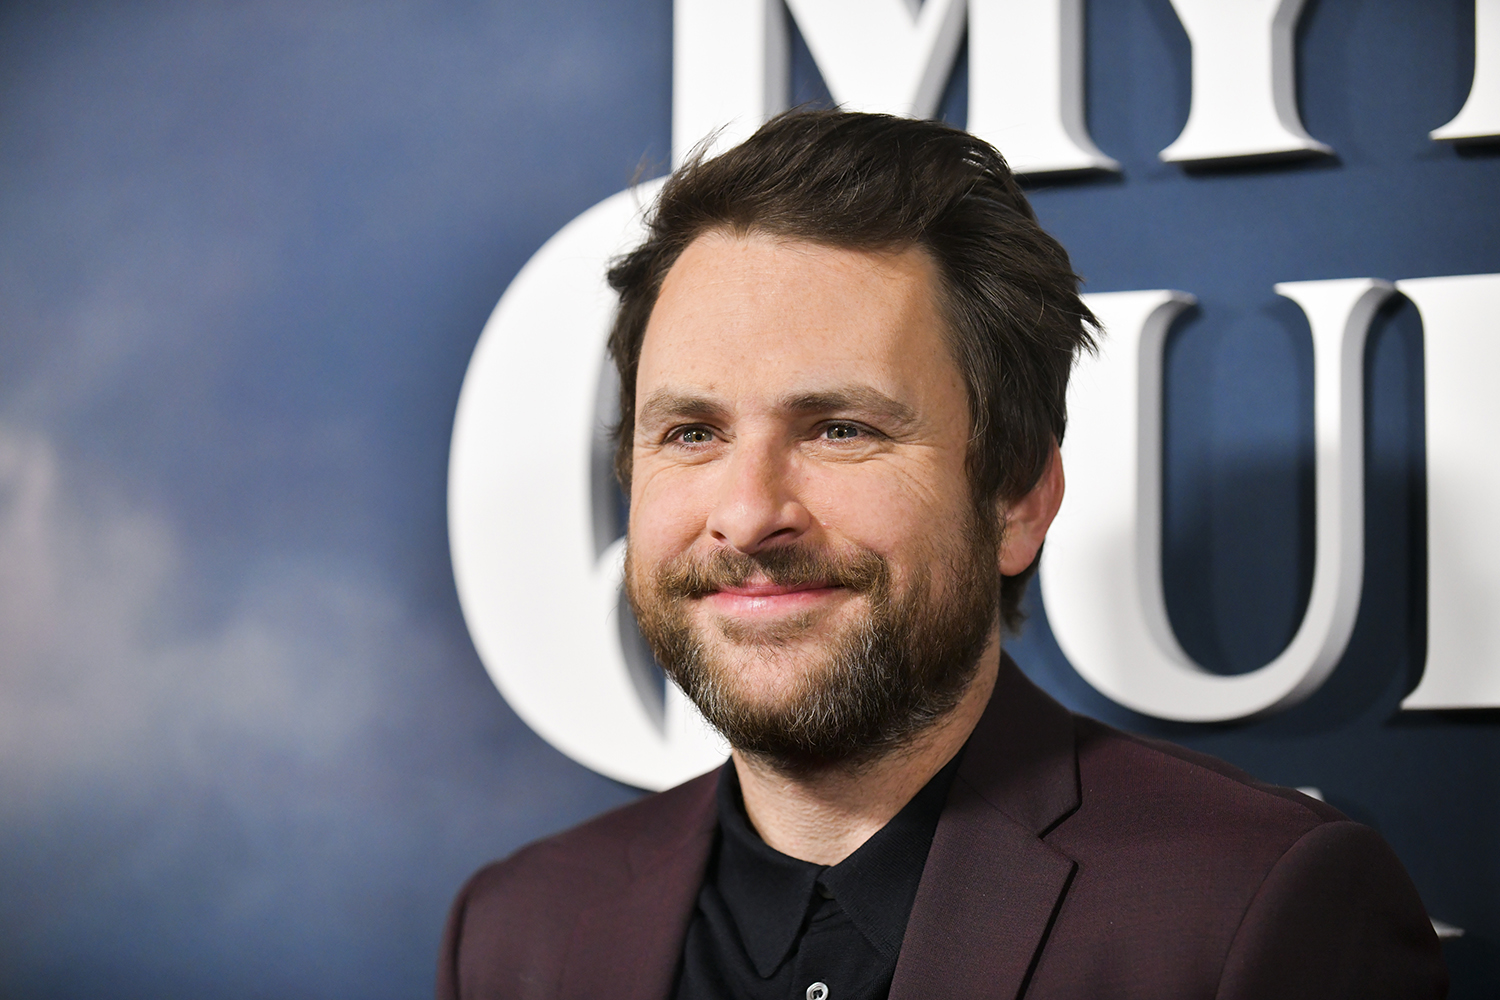 Super Mario Bros actor Charlie Day the Premiere of Apple TV+'s "Mythic Quest: Raven's Banquet"